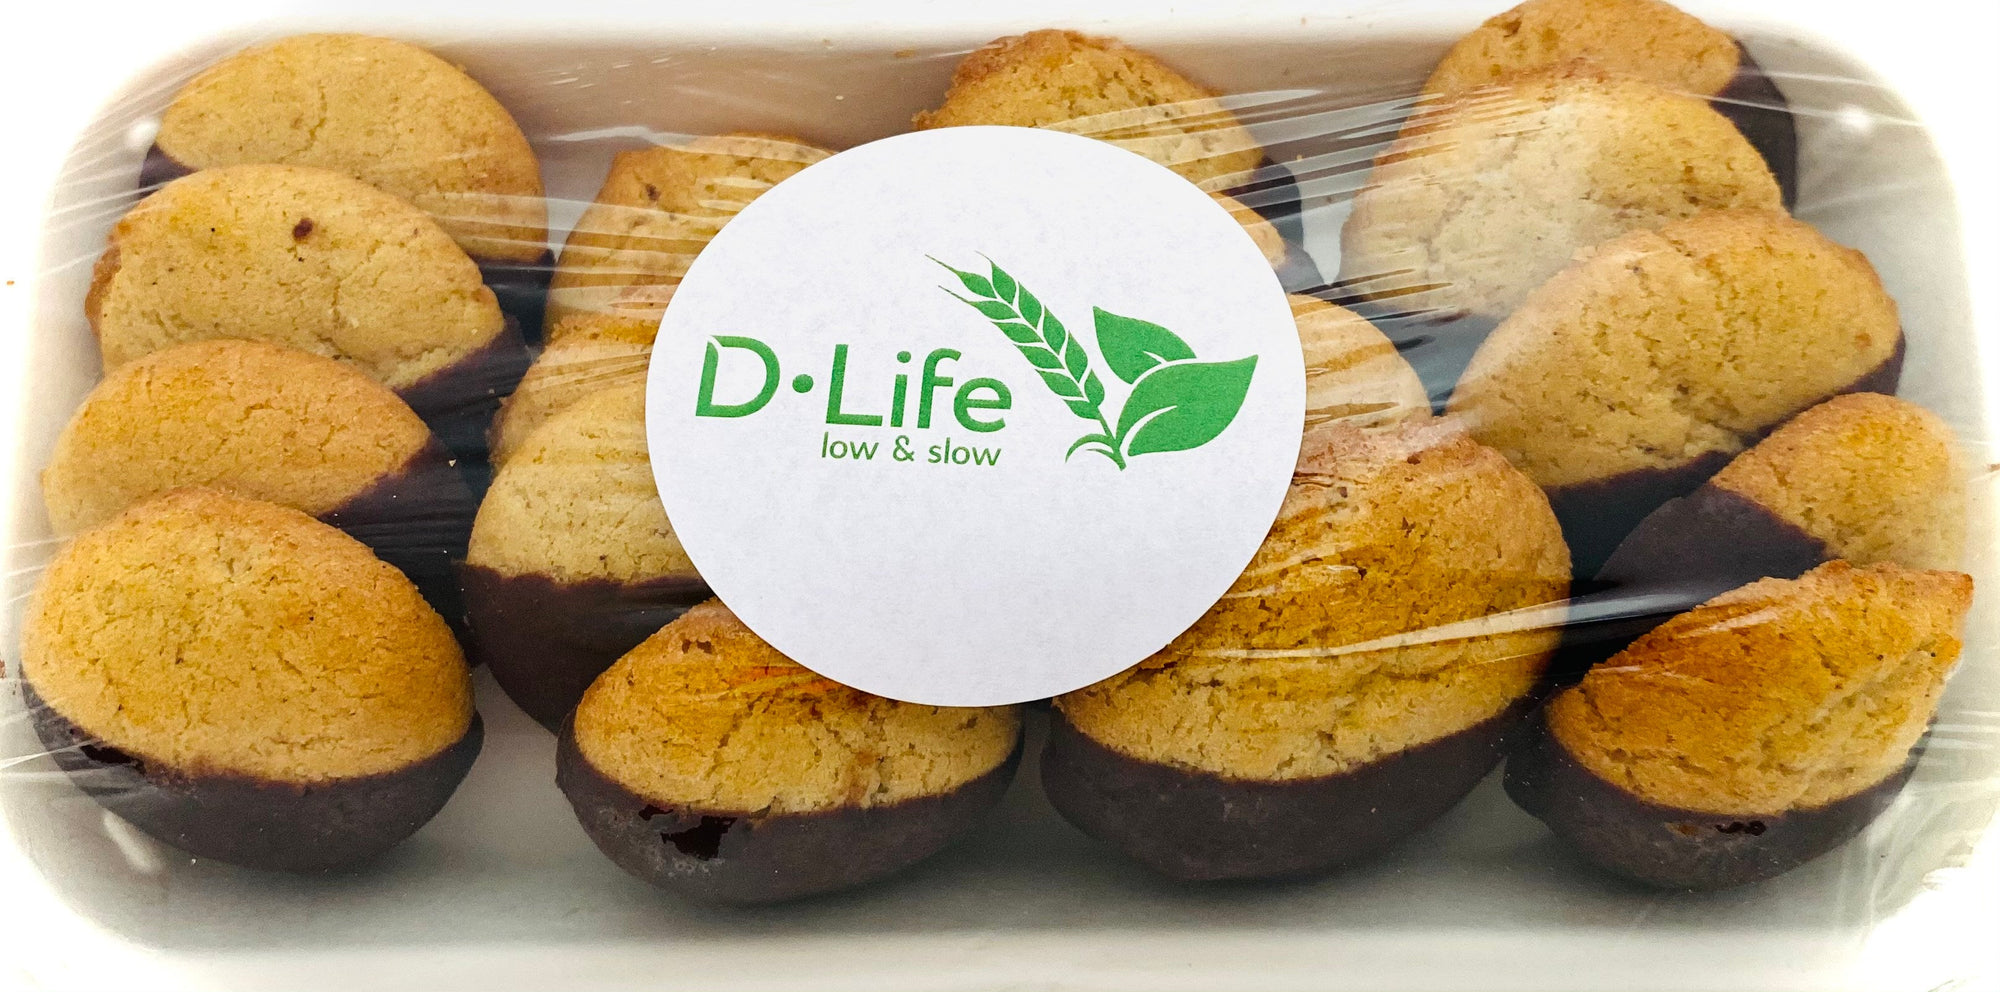 D-Life low-carb chocolate biscuits